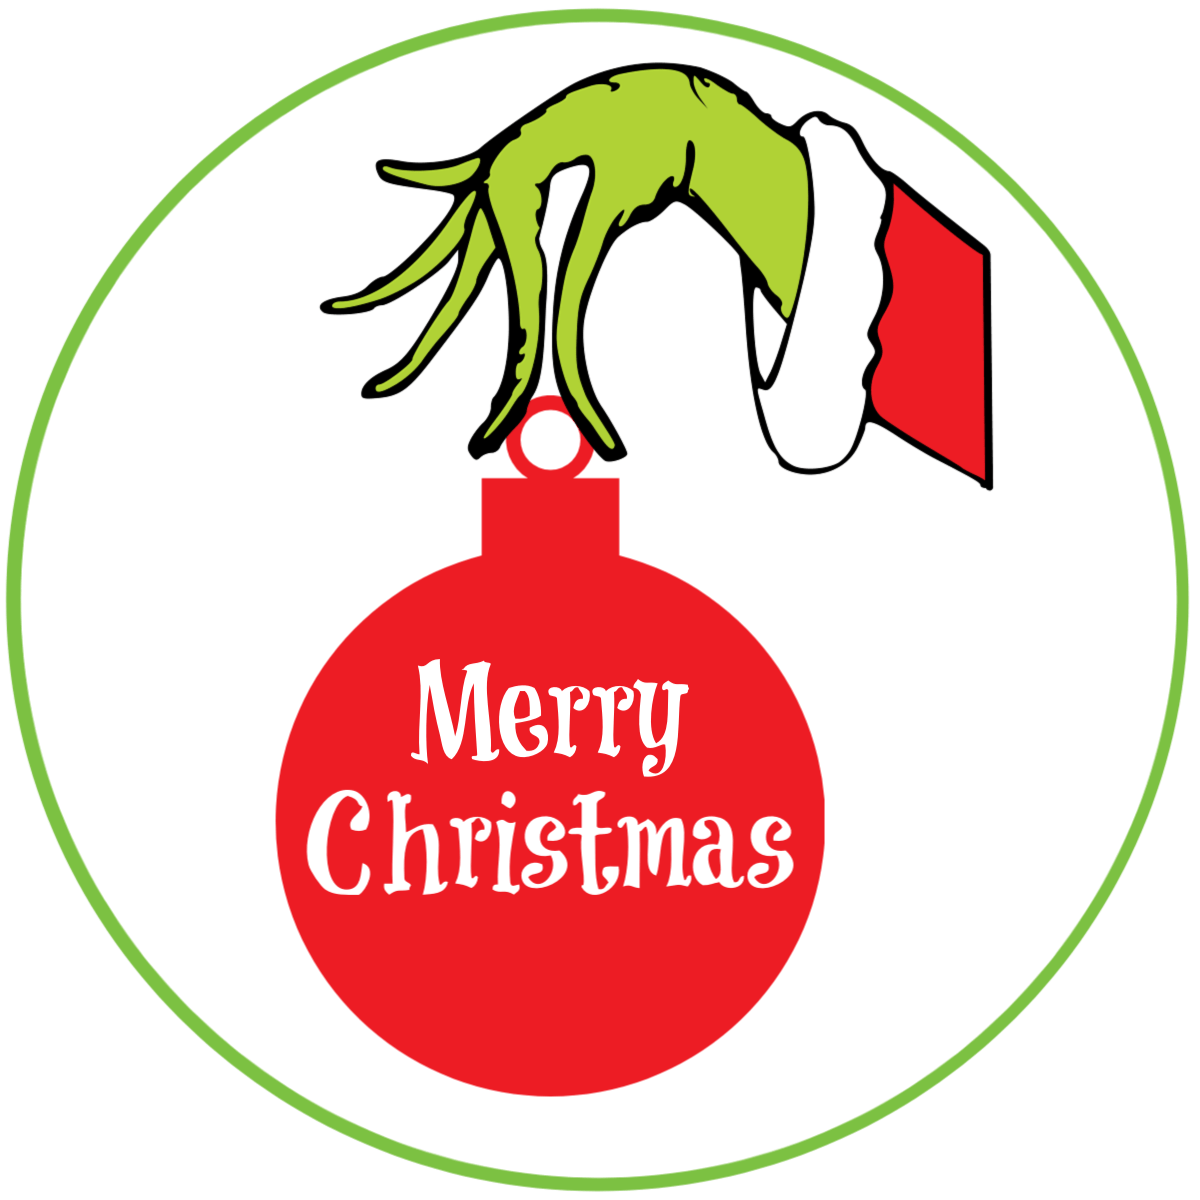 Grinch Hand PNG